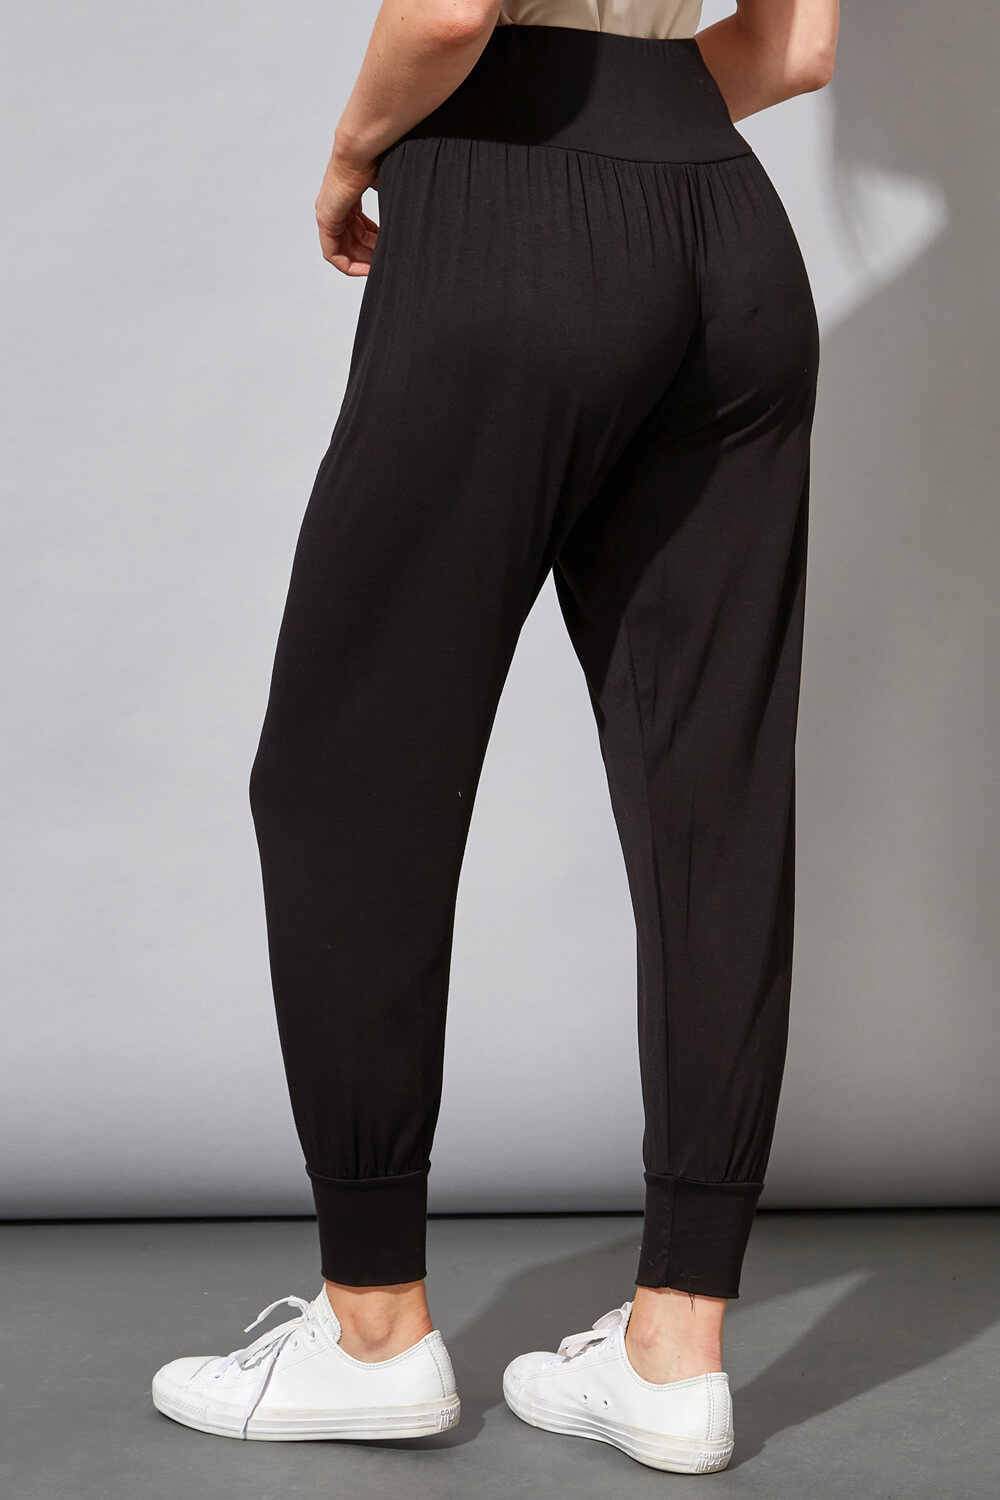 Black Jersey Stretch Harem Trousers, Image 2 of 2